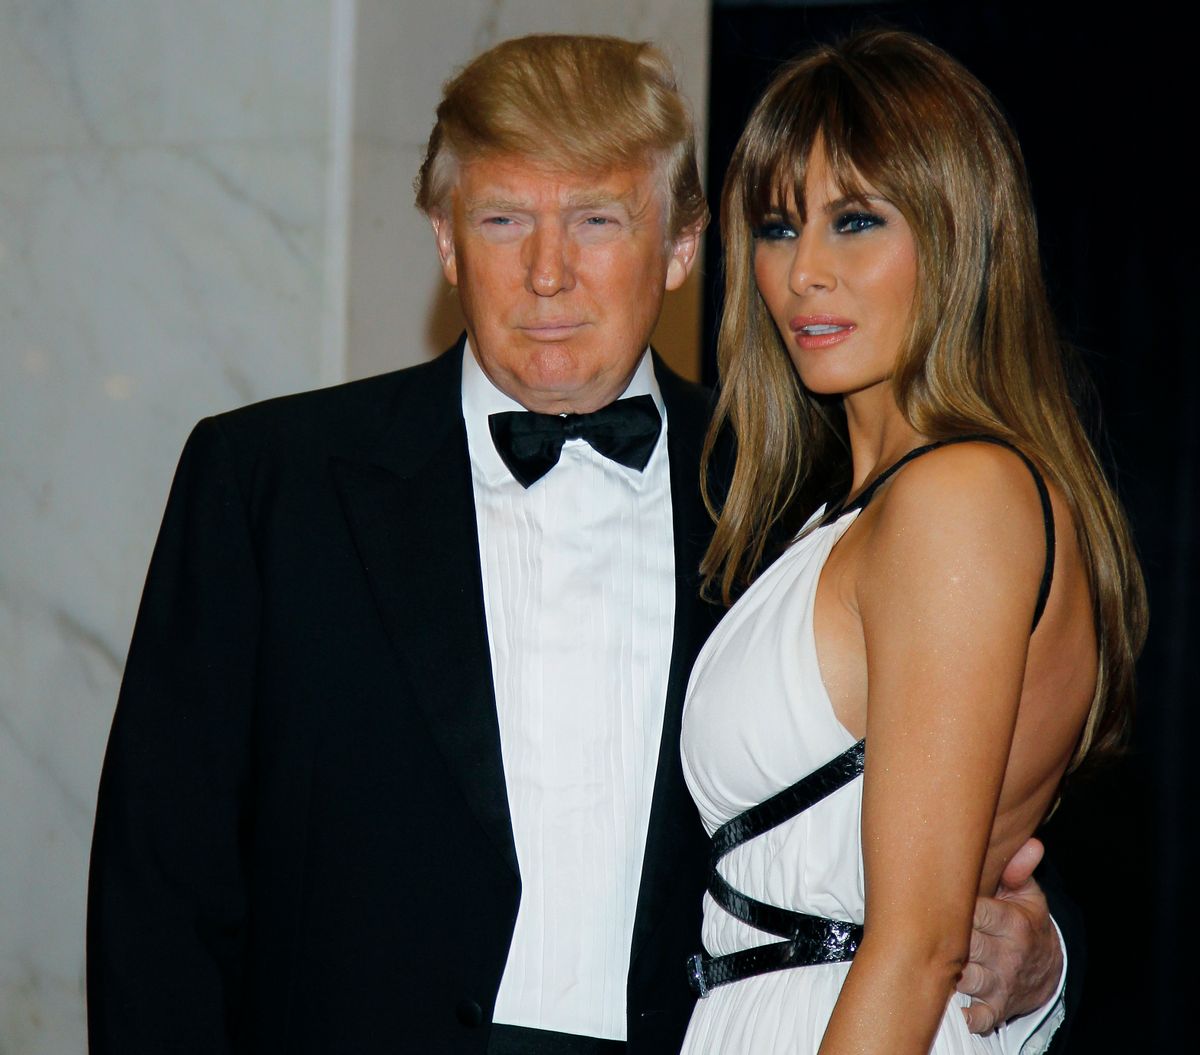 FILE - In this April 30, 2011, file photo Donald Trump, left, and Melania Trump arrive for the White House Correspondents Dinner in Washington. He wont be on Novembers ballot, but President Barack Obama is slowly embracing his role as the anti-Trump, taking on the Republican front-runner in ways that no other Democrat can. Obamas public scolding of Trump, who for years peddled inaccurate claims about Obamas birth certificate, dates back to 2011, when Obama roasted him at the dinner. Trump was visibly humiliated as Obama lobbed joke after joke at him on national television. (AP Photo/Alex Brandon, File) (AP)